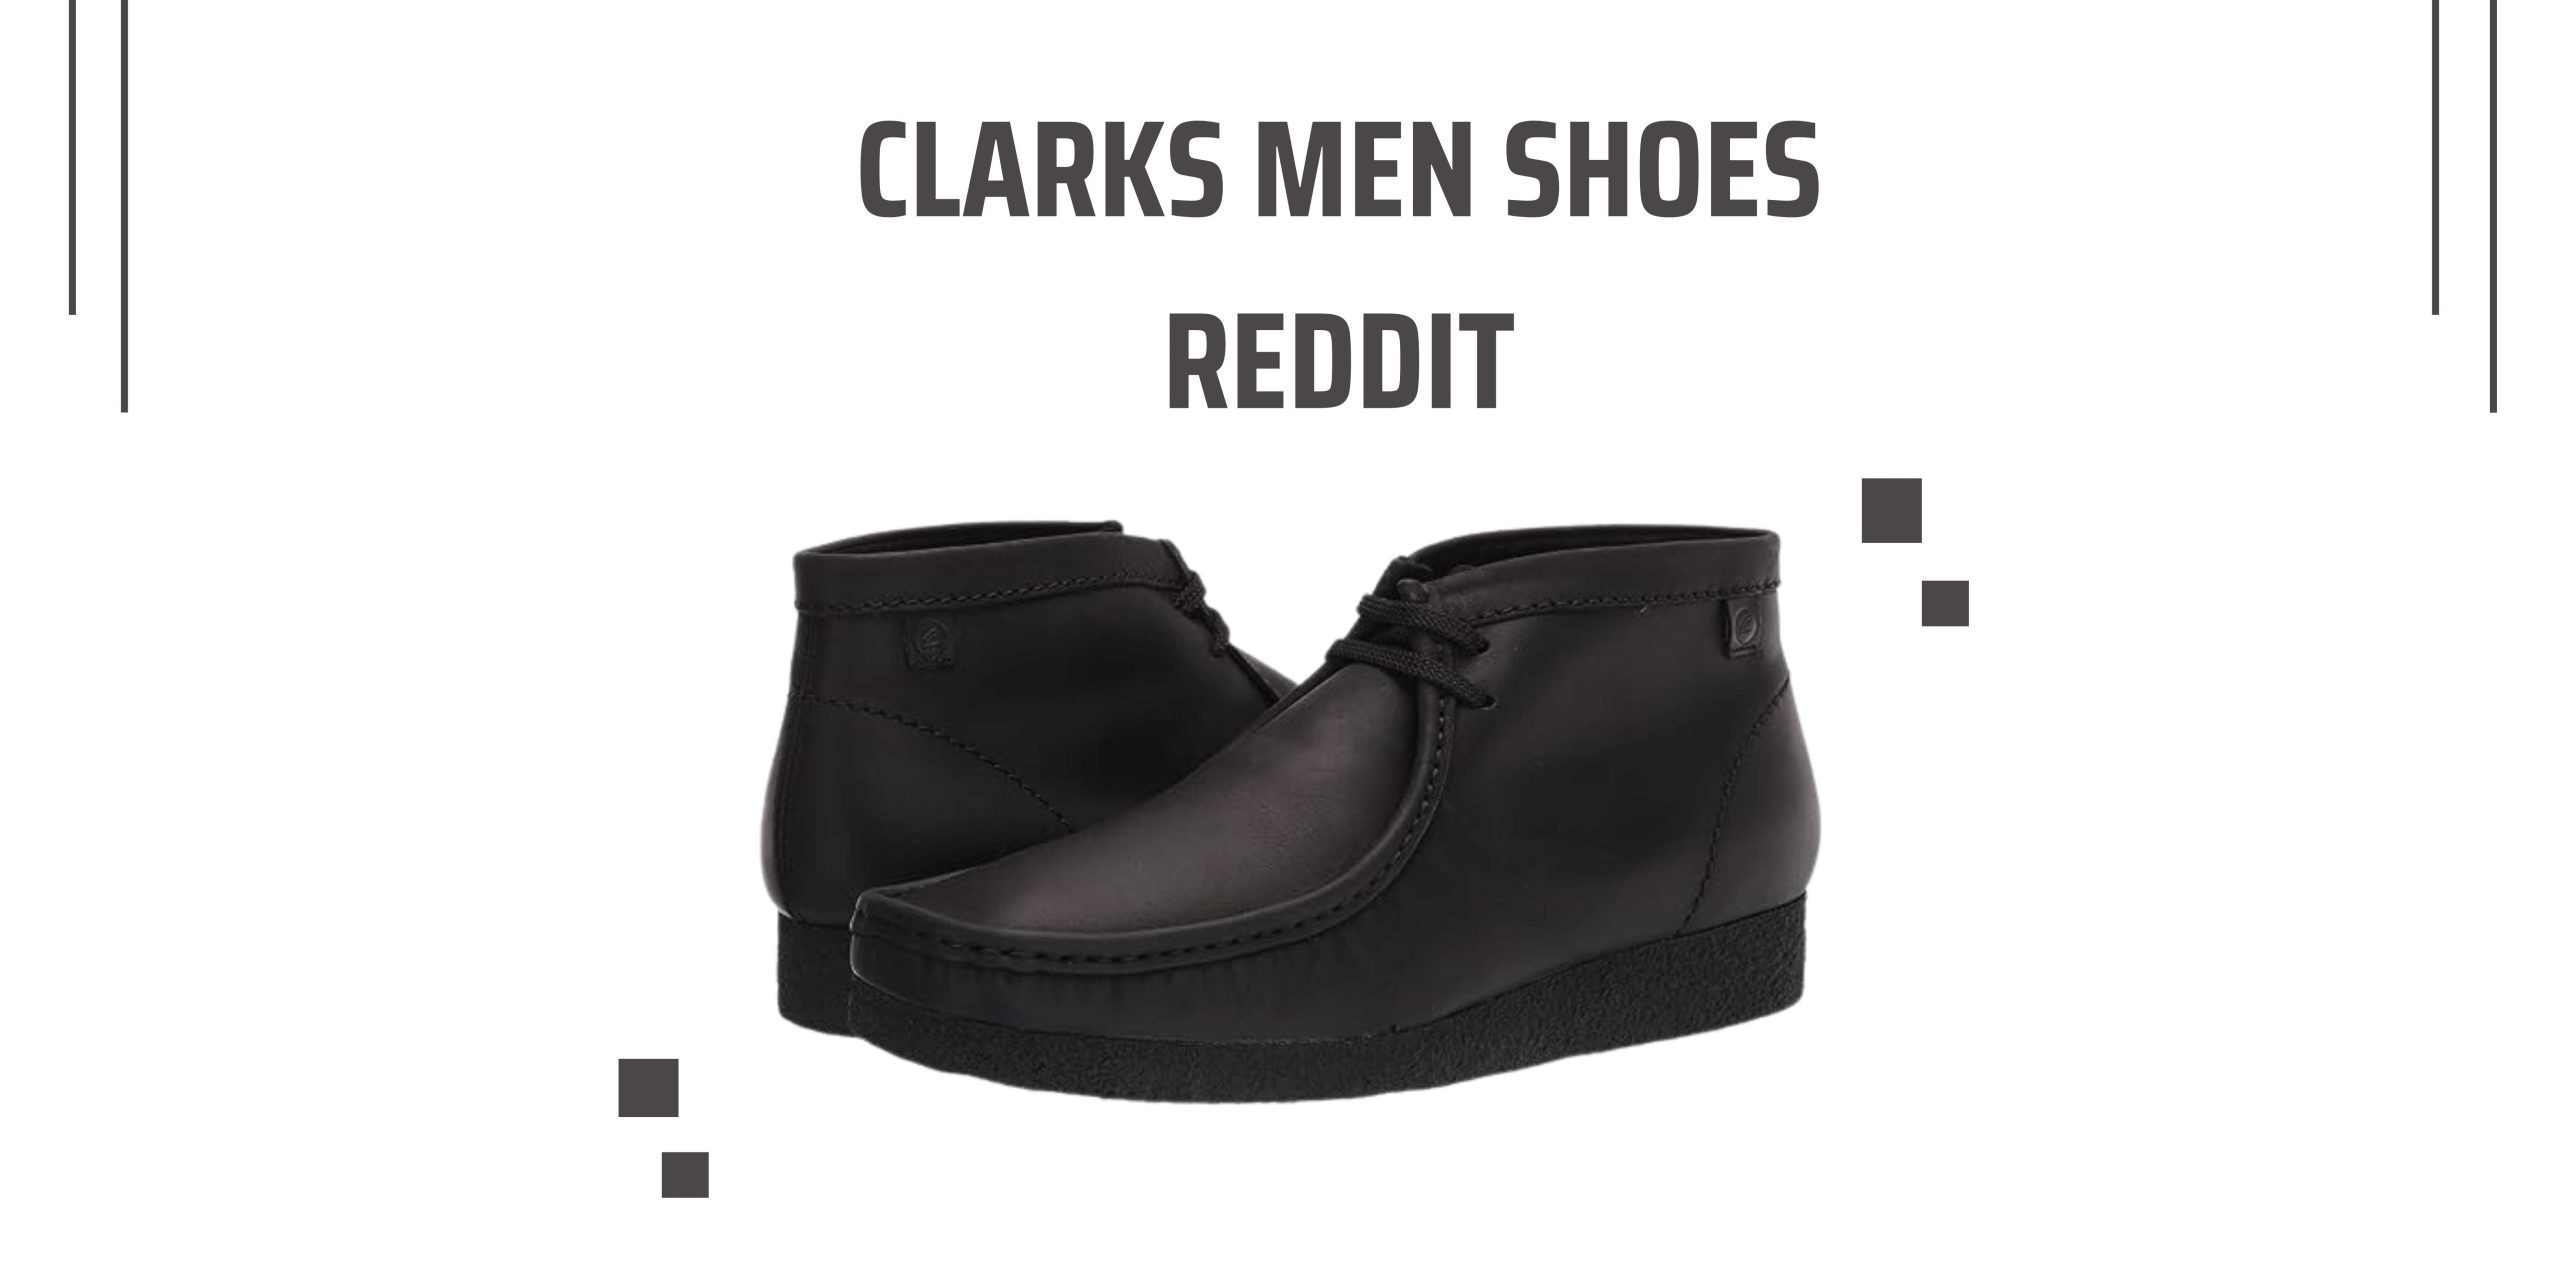 Clarks Men Shoes Reddit: Stepping into Style and Comfort